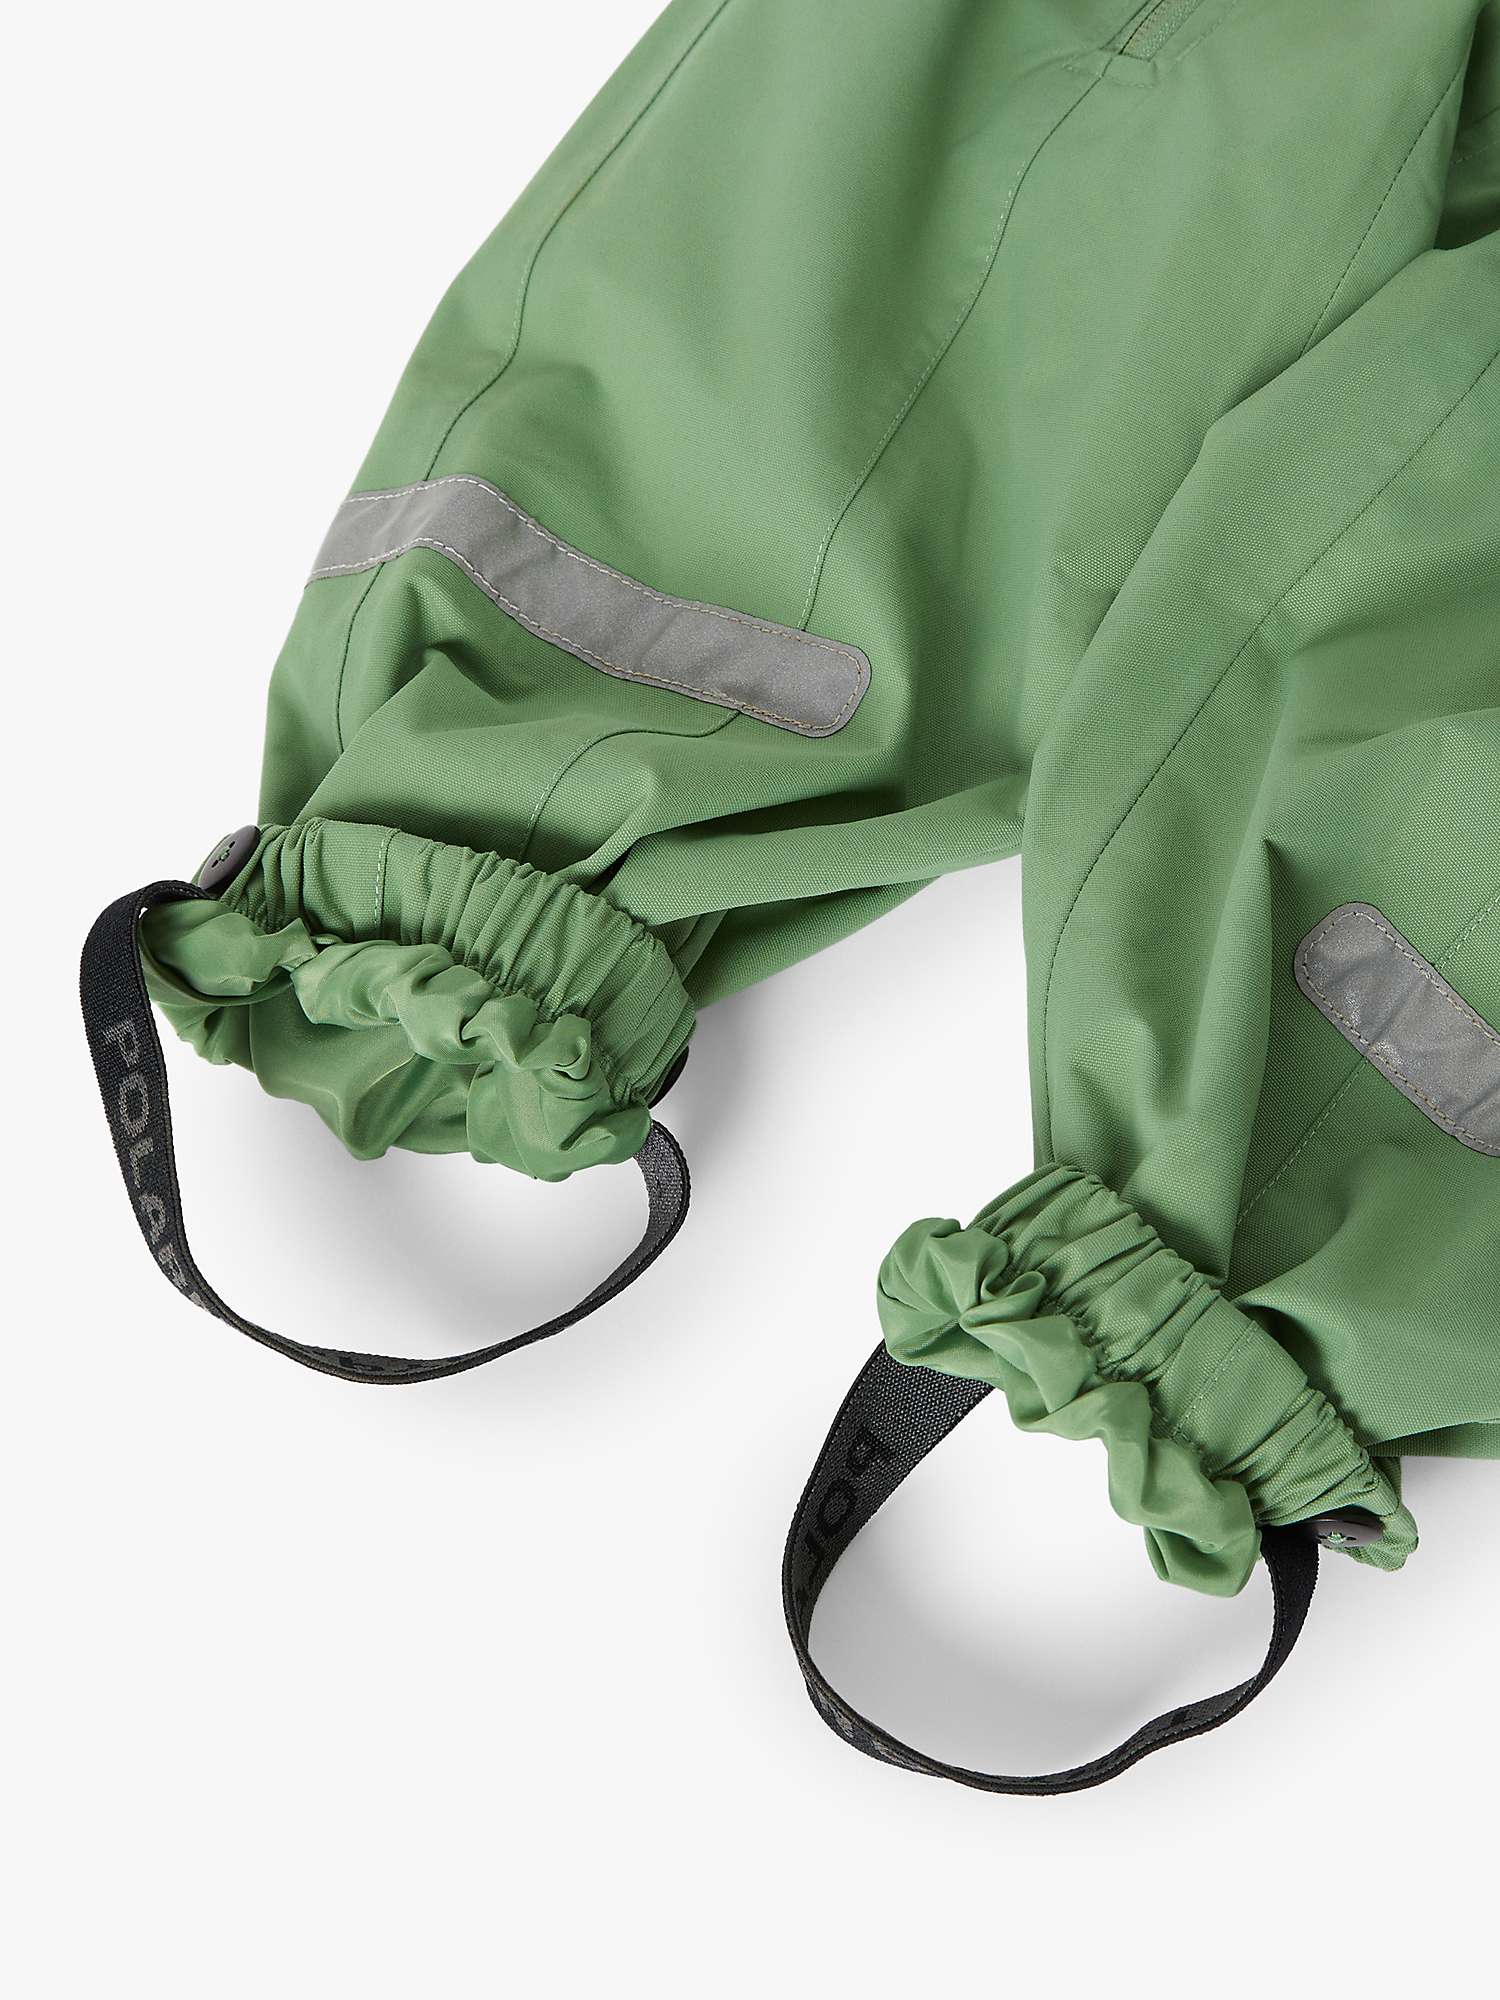 Buy Polarn O. Pyret Baby Shell Overalls, Green Online at johnlewis.com